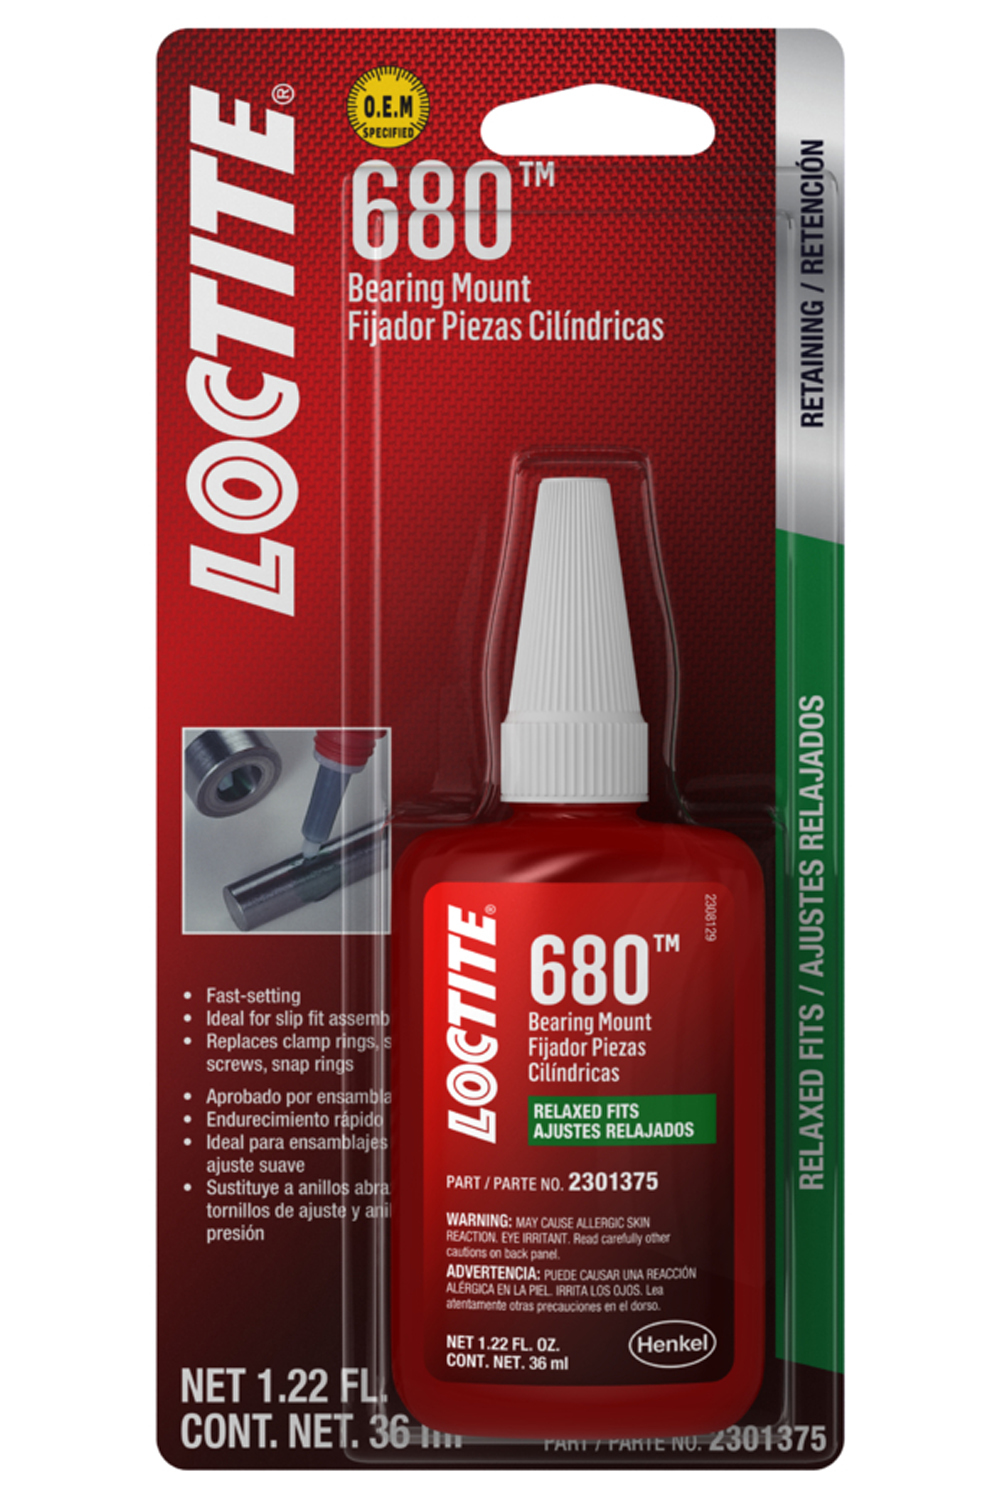 LOCTITE 234933 Glues and Adhesives